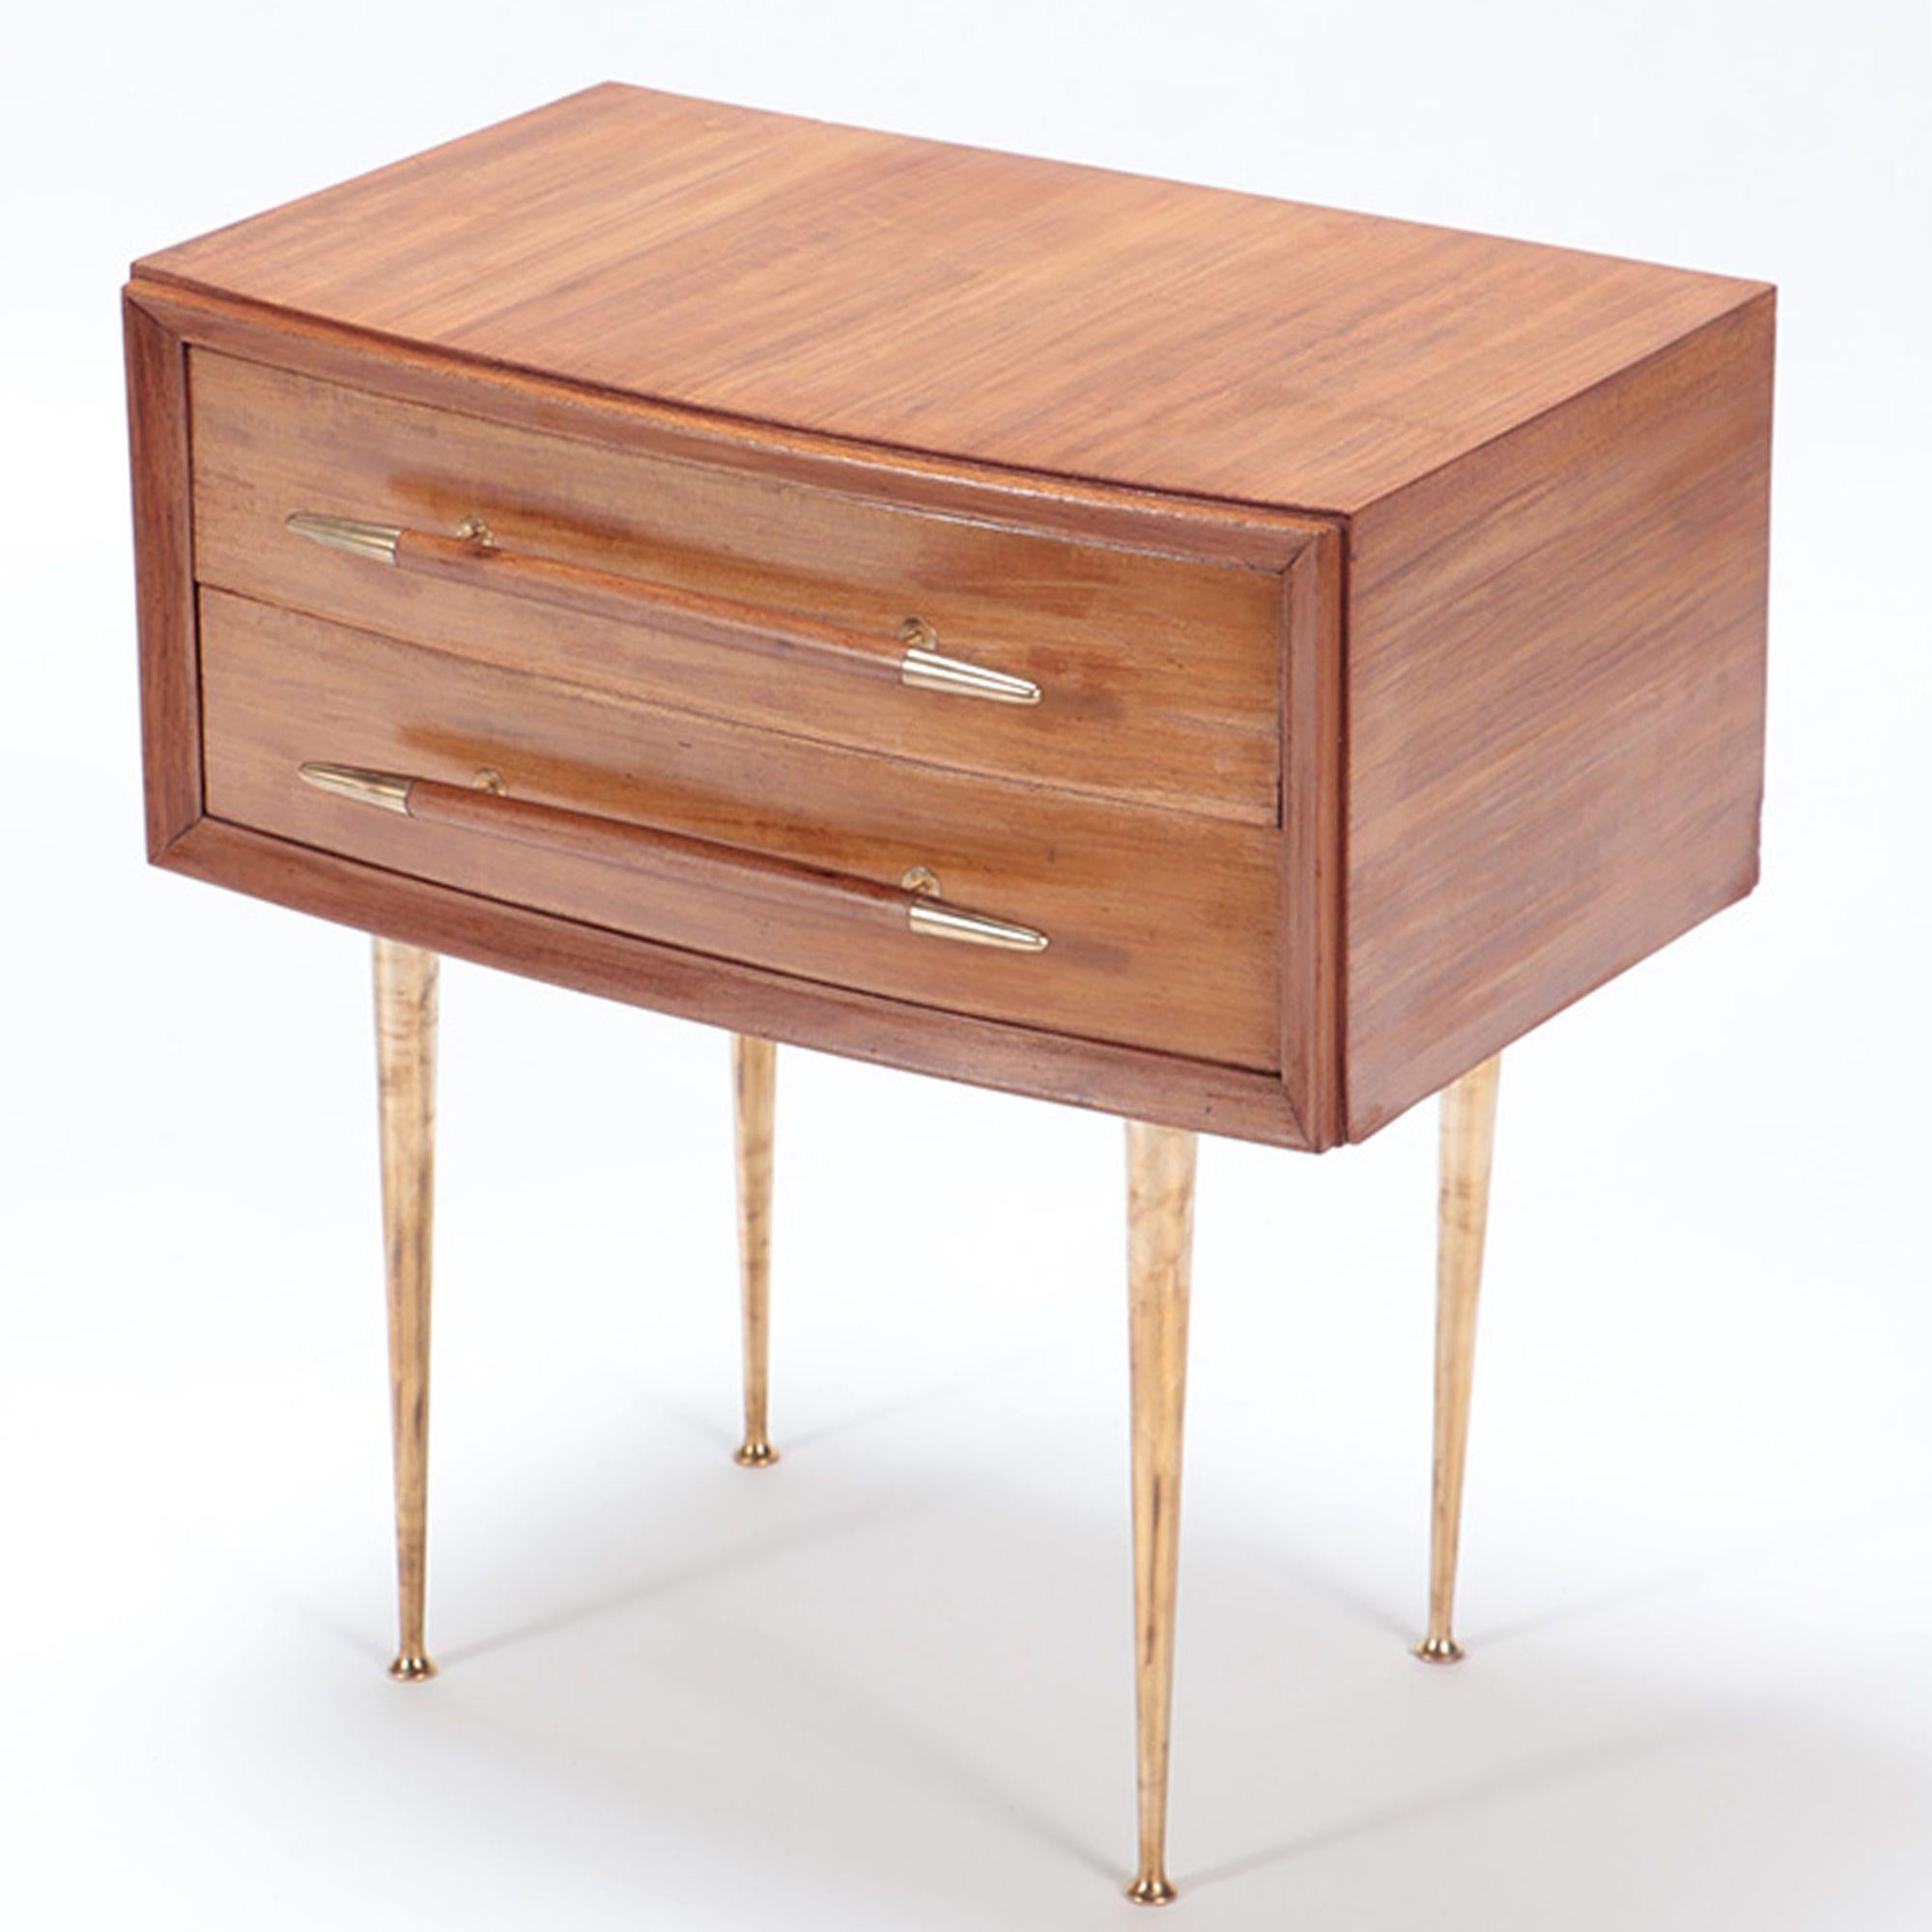 Pair of Mid-Century Modern Walnut and Brass Night Stands, circa 1955 For Sale 3